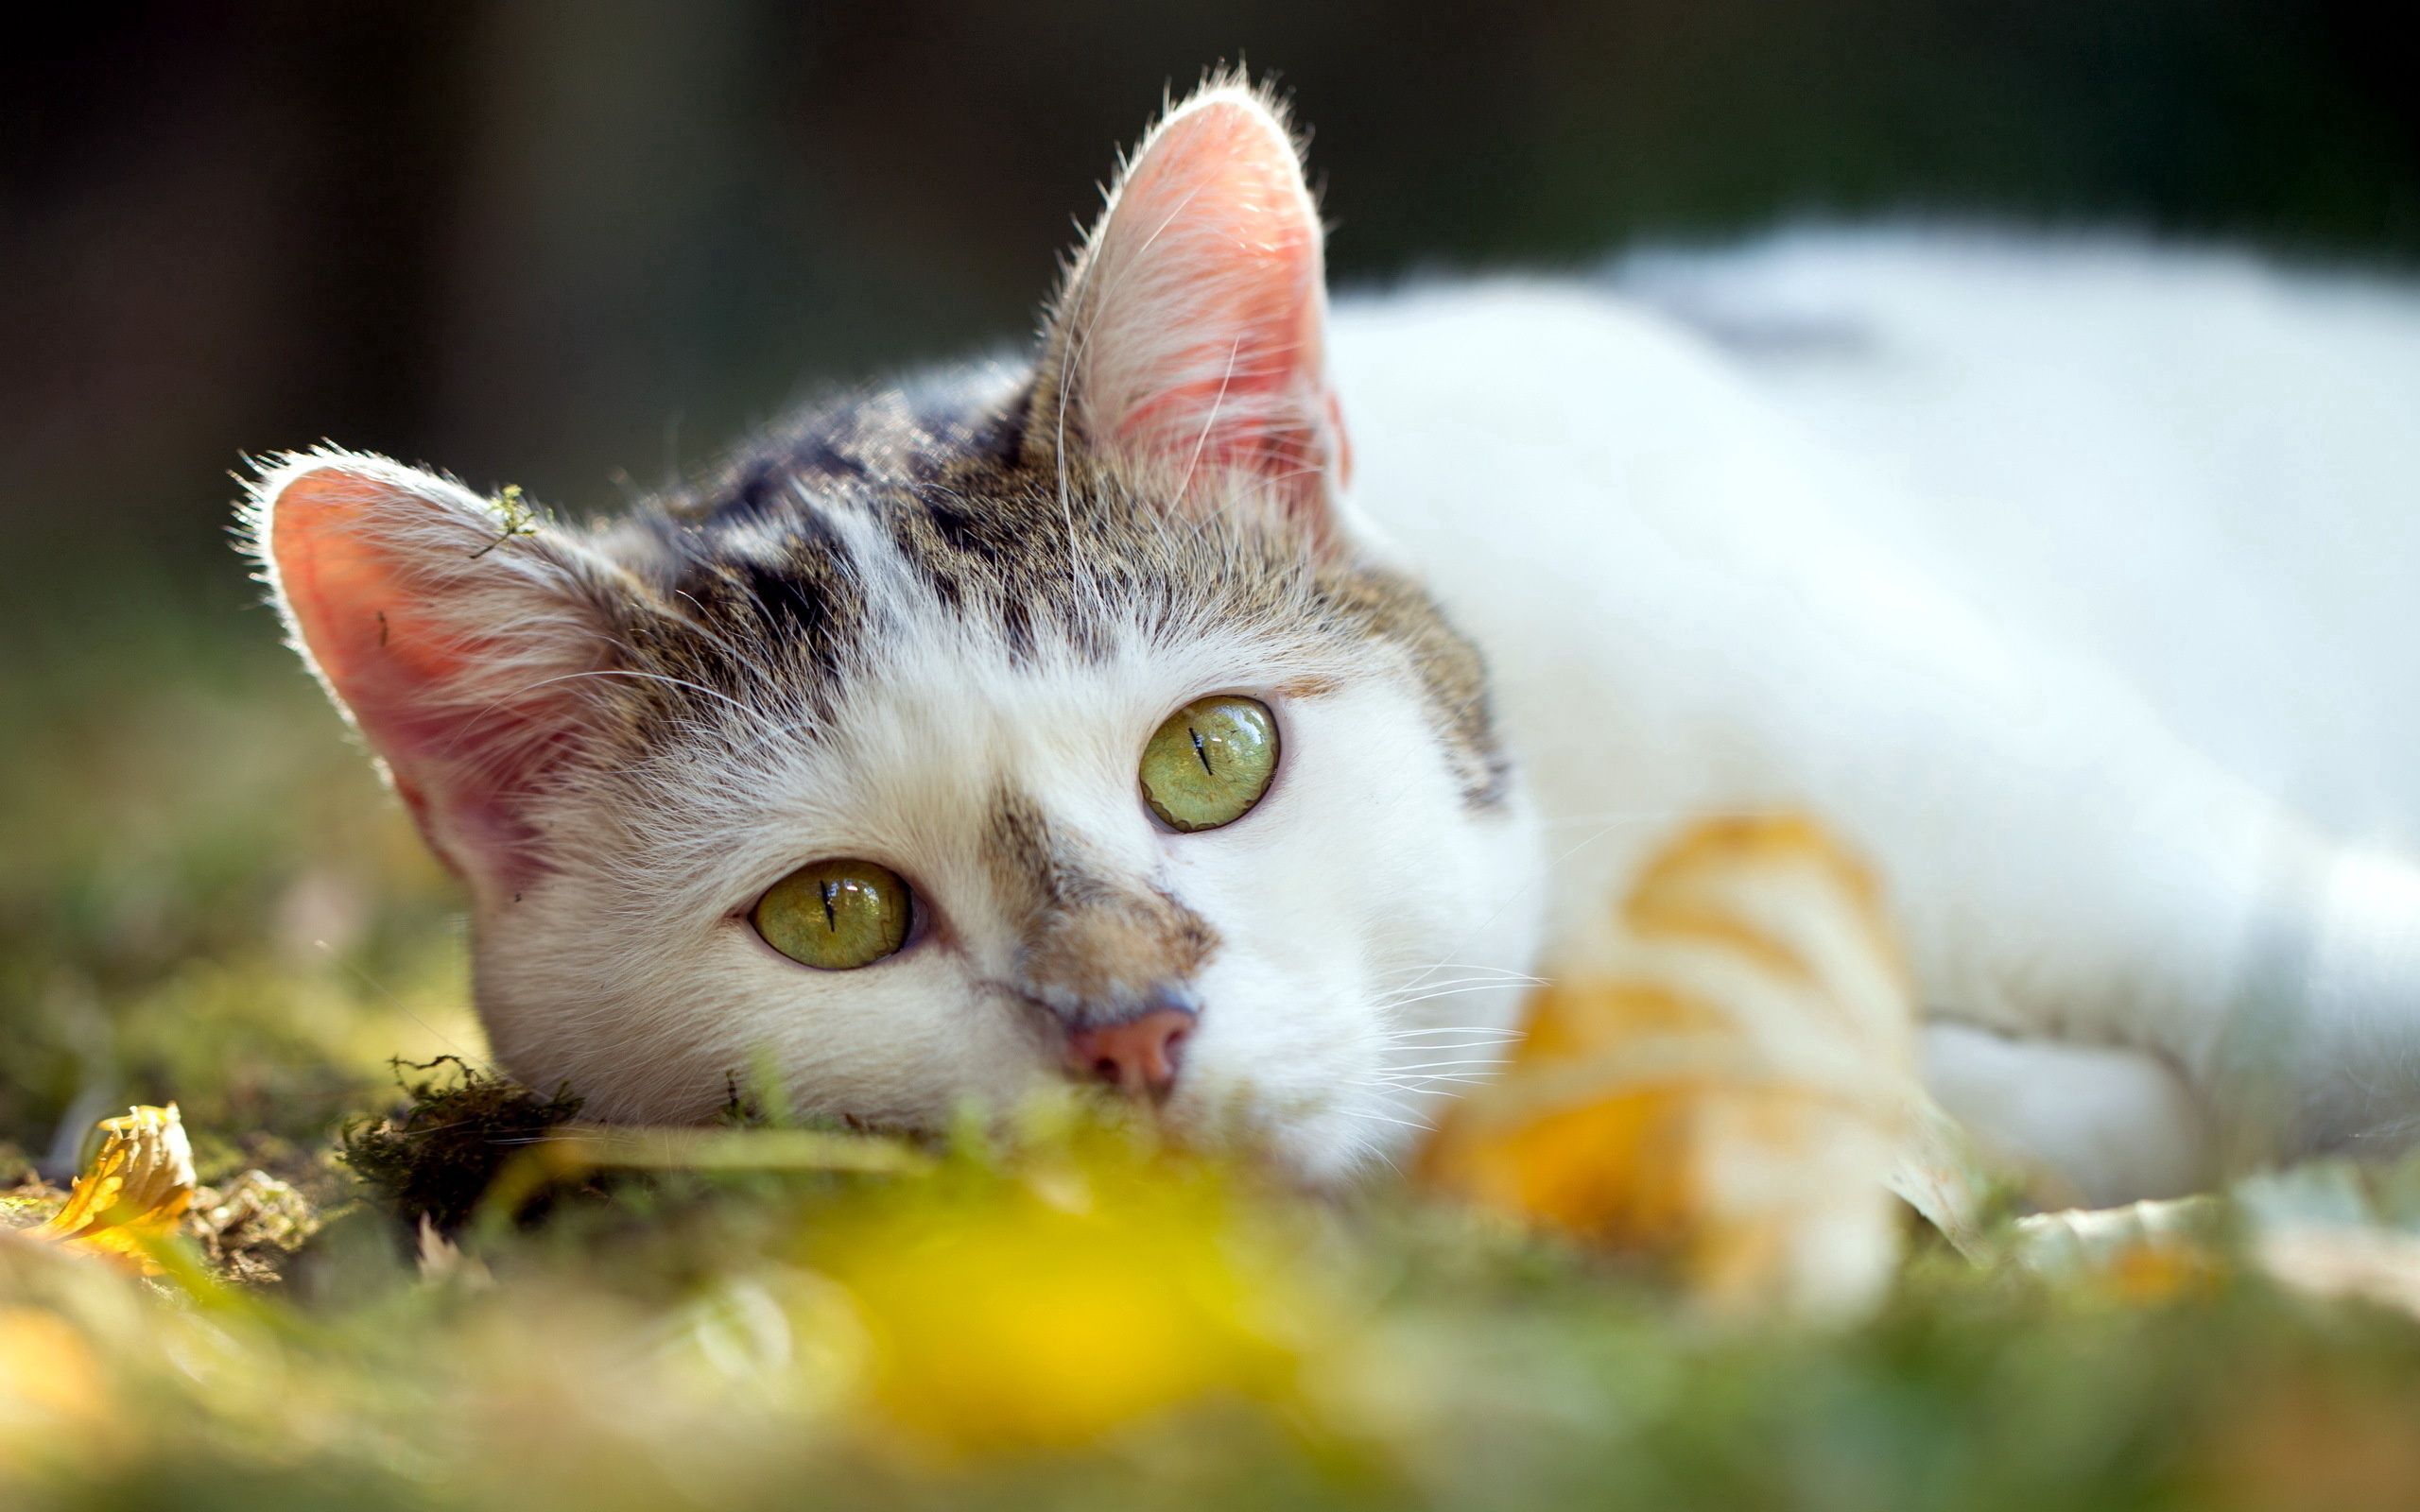 Full HD Wallpaper animals, cat, to lie down, lie, muzzle, sadness, relaxation, rest, sorrow